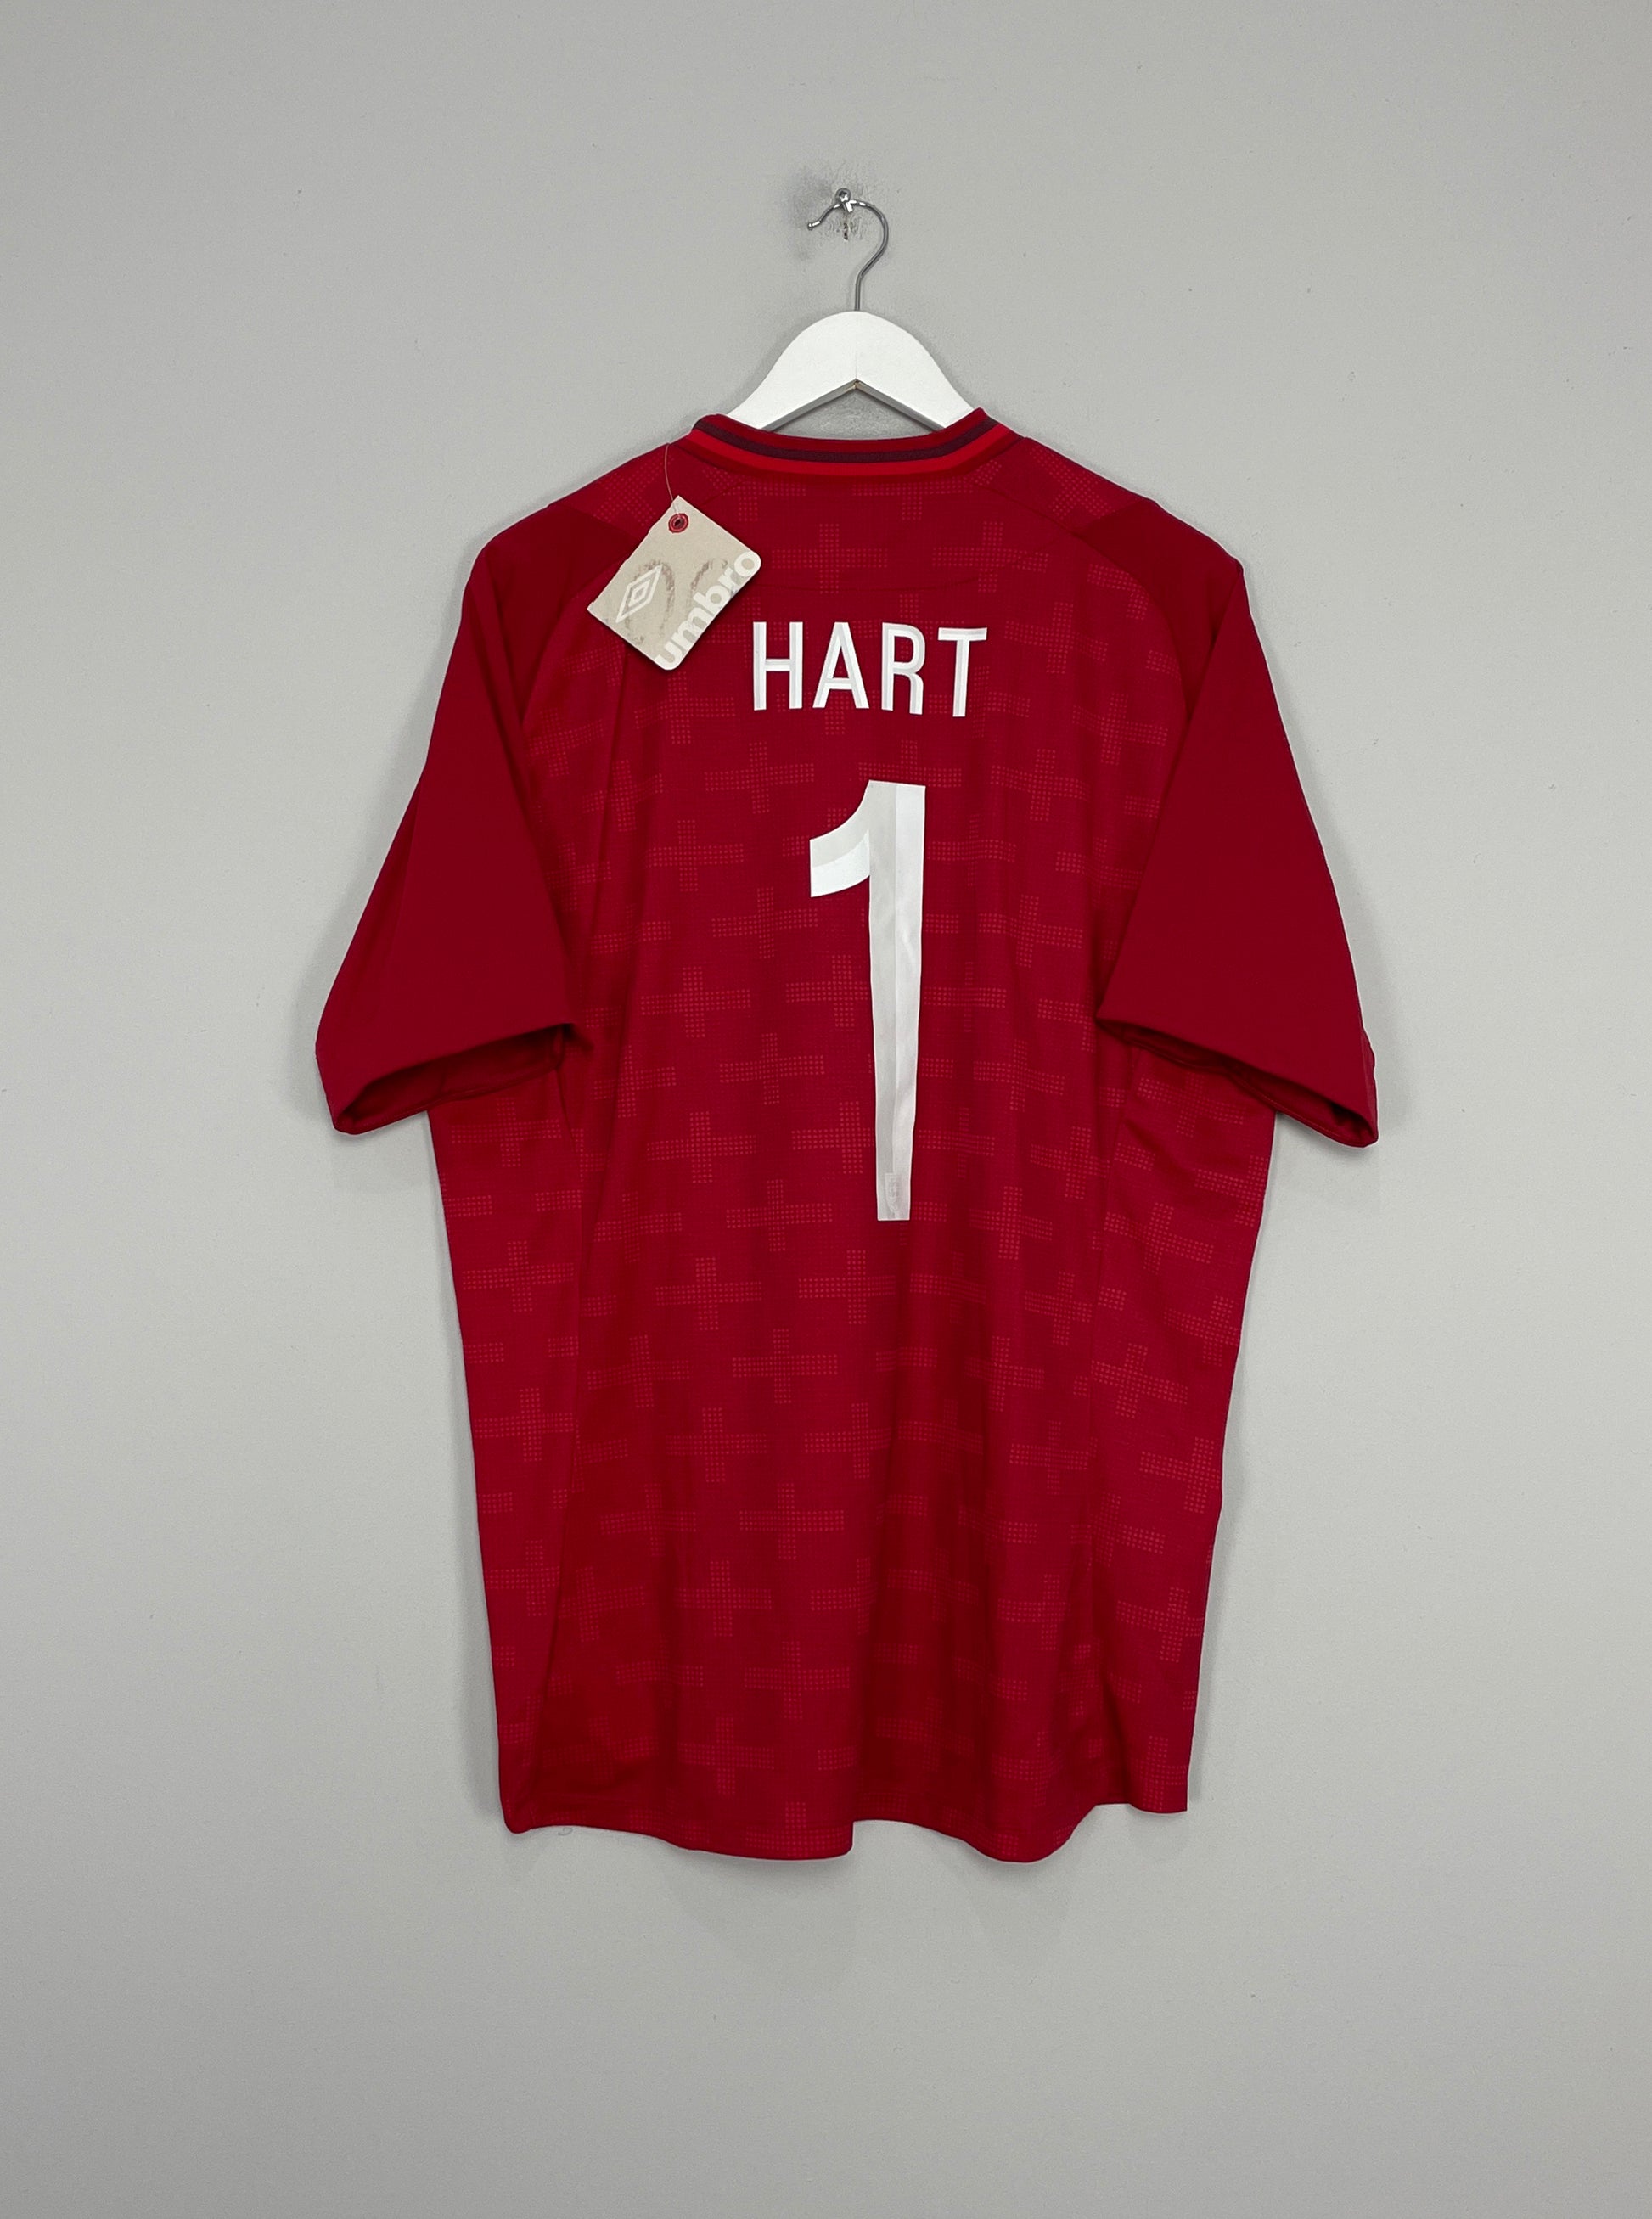 Image of the England Hart shirt from the 2012/13 season